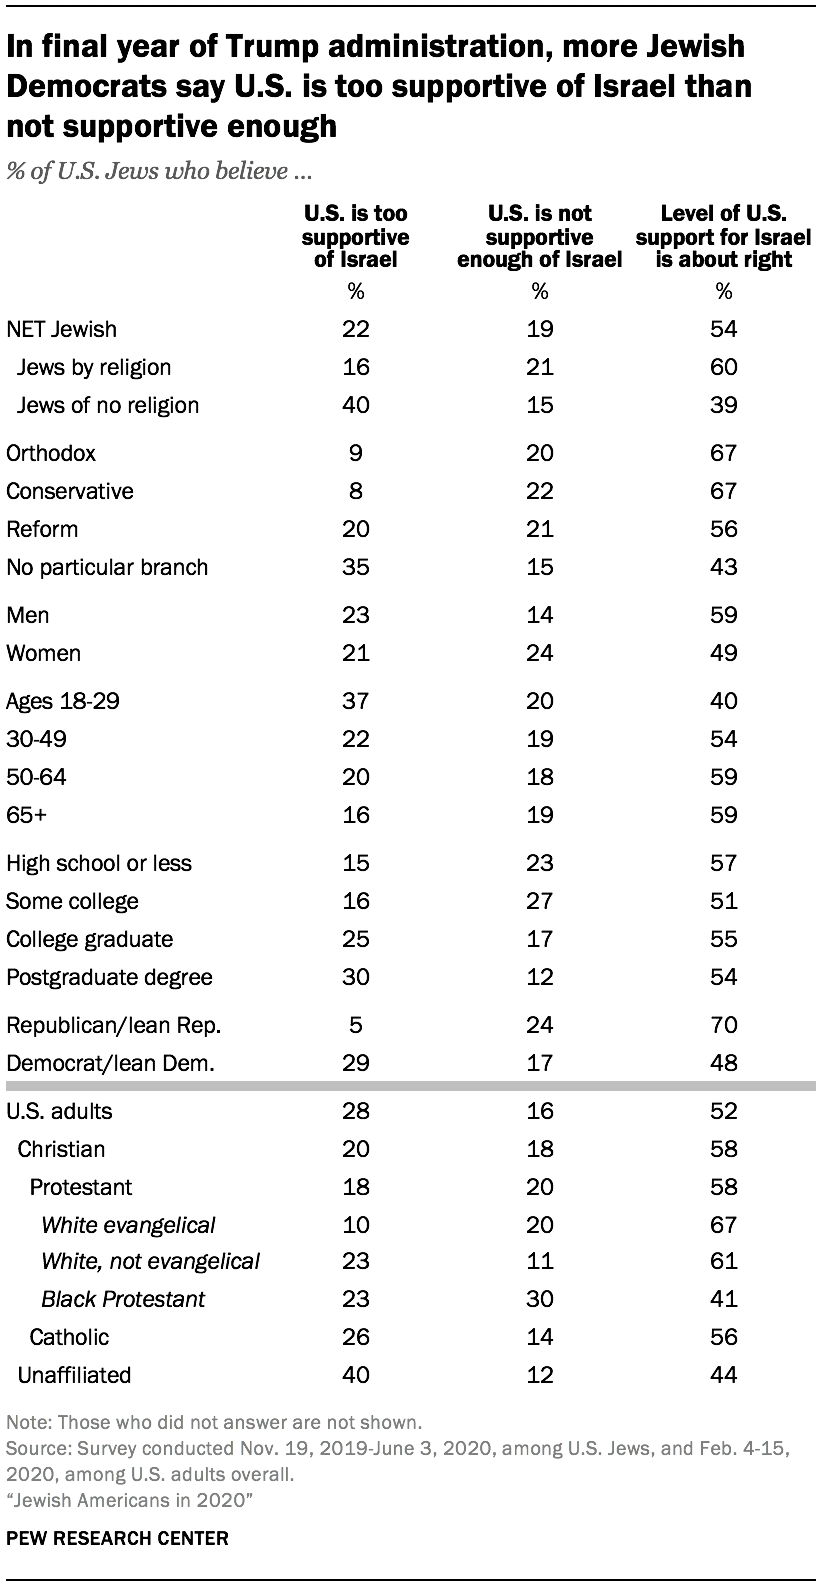 In final year of Trump administration, more Jewish Democrats say U.S. is too supportive of Israel than not supportive enough